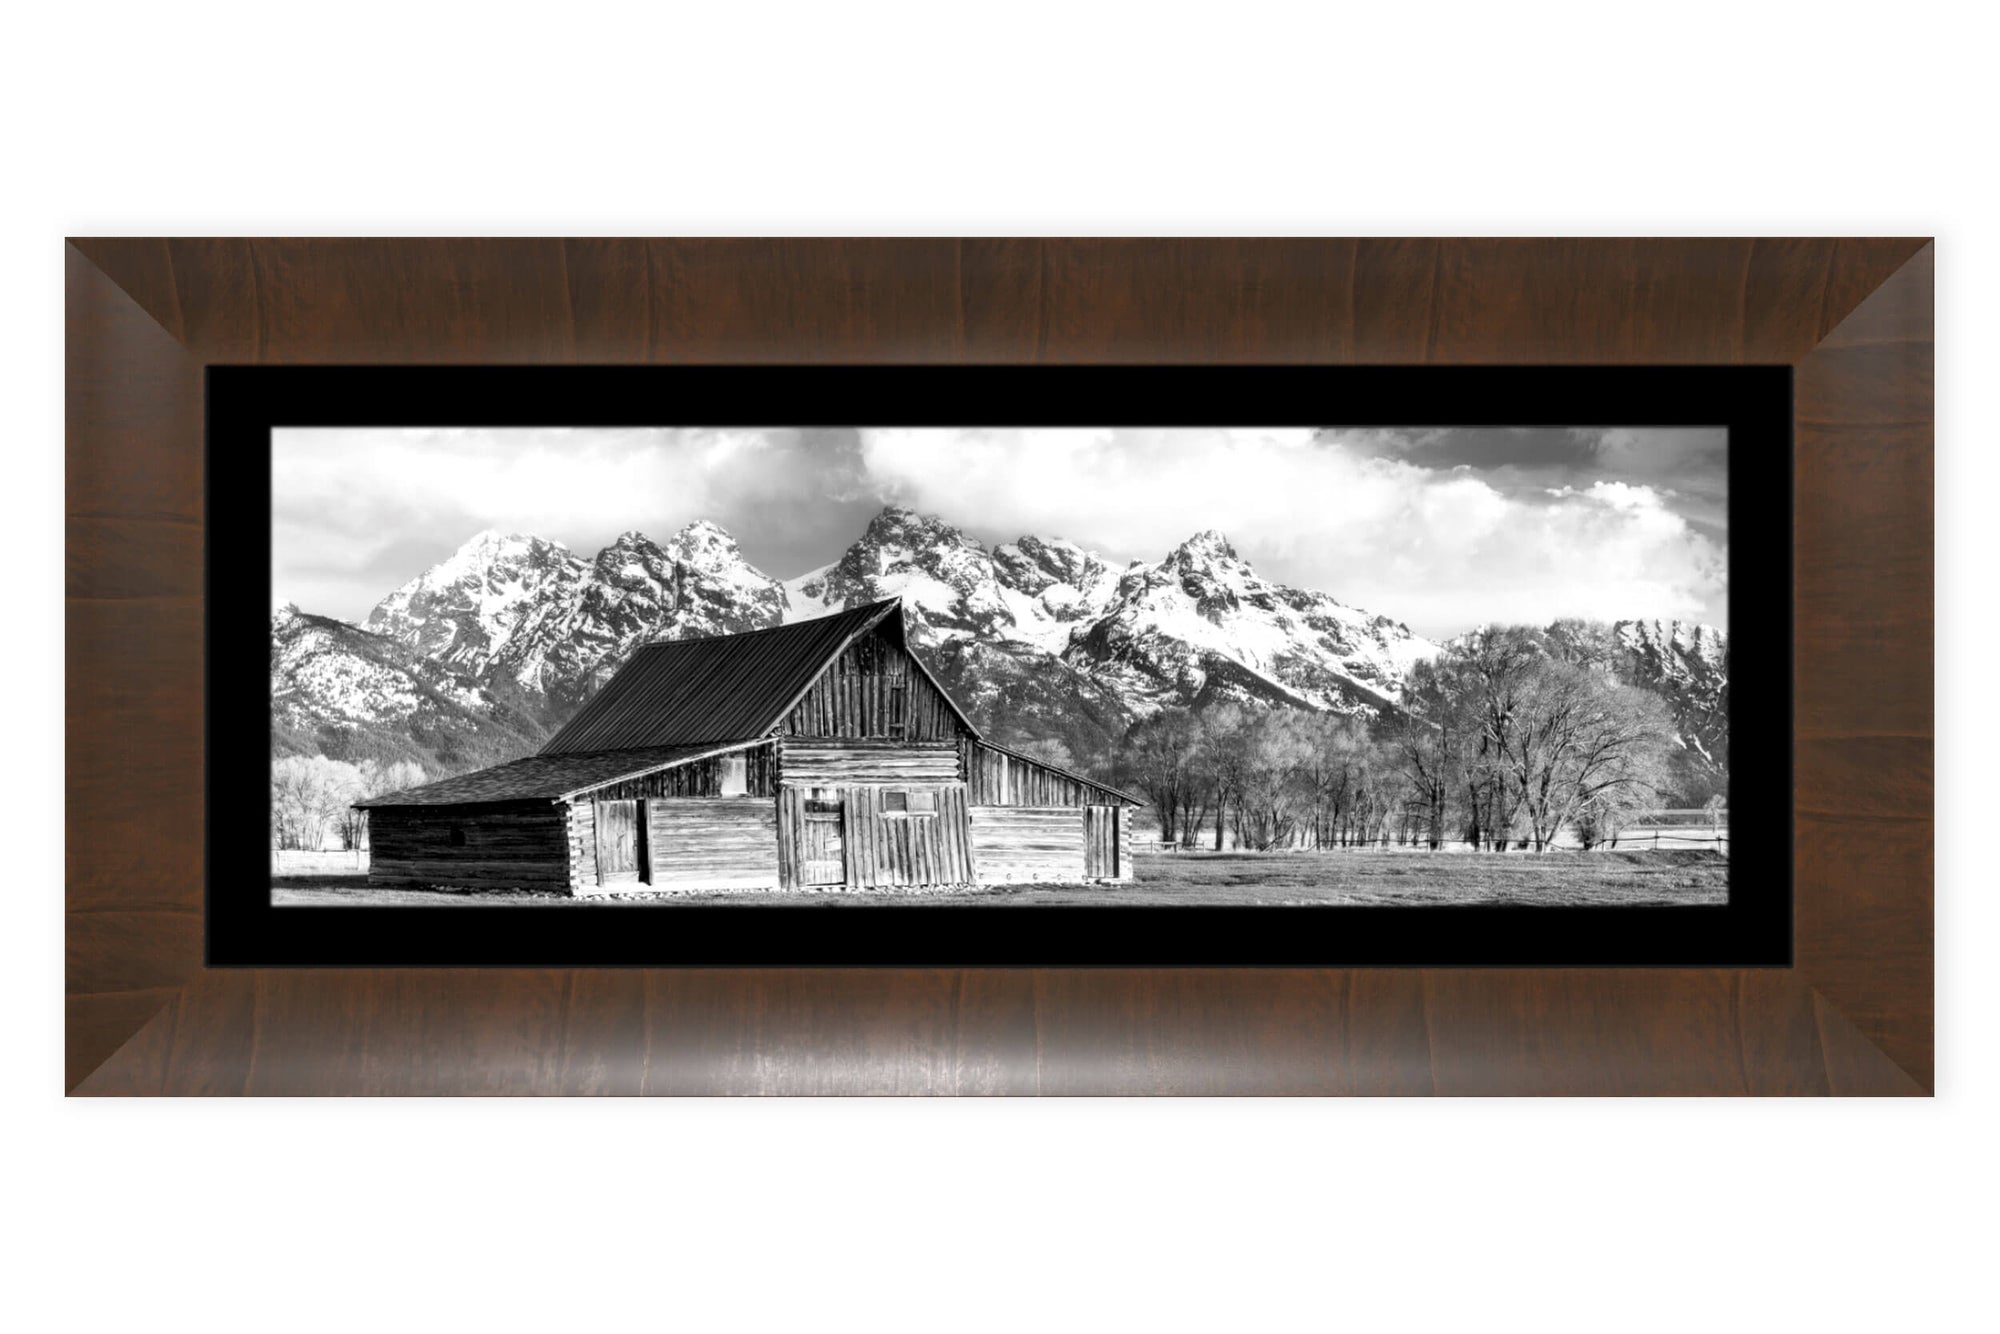 A framed black and white photograph of the famous barn in Grand Teton National Park.